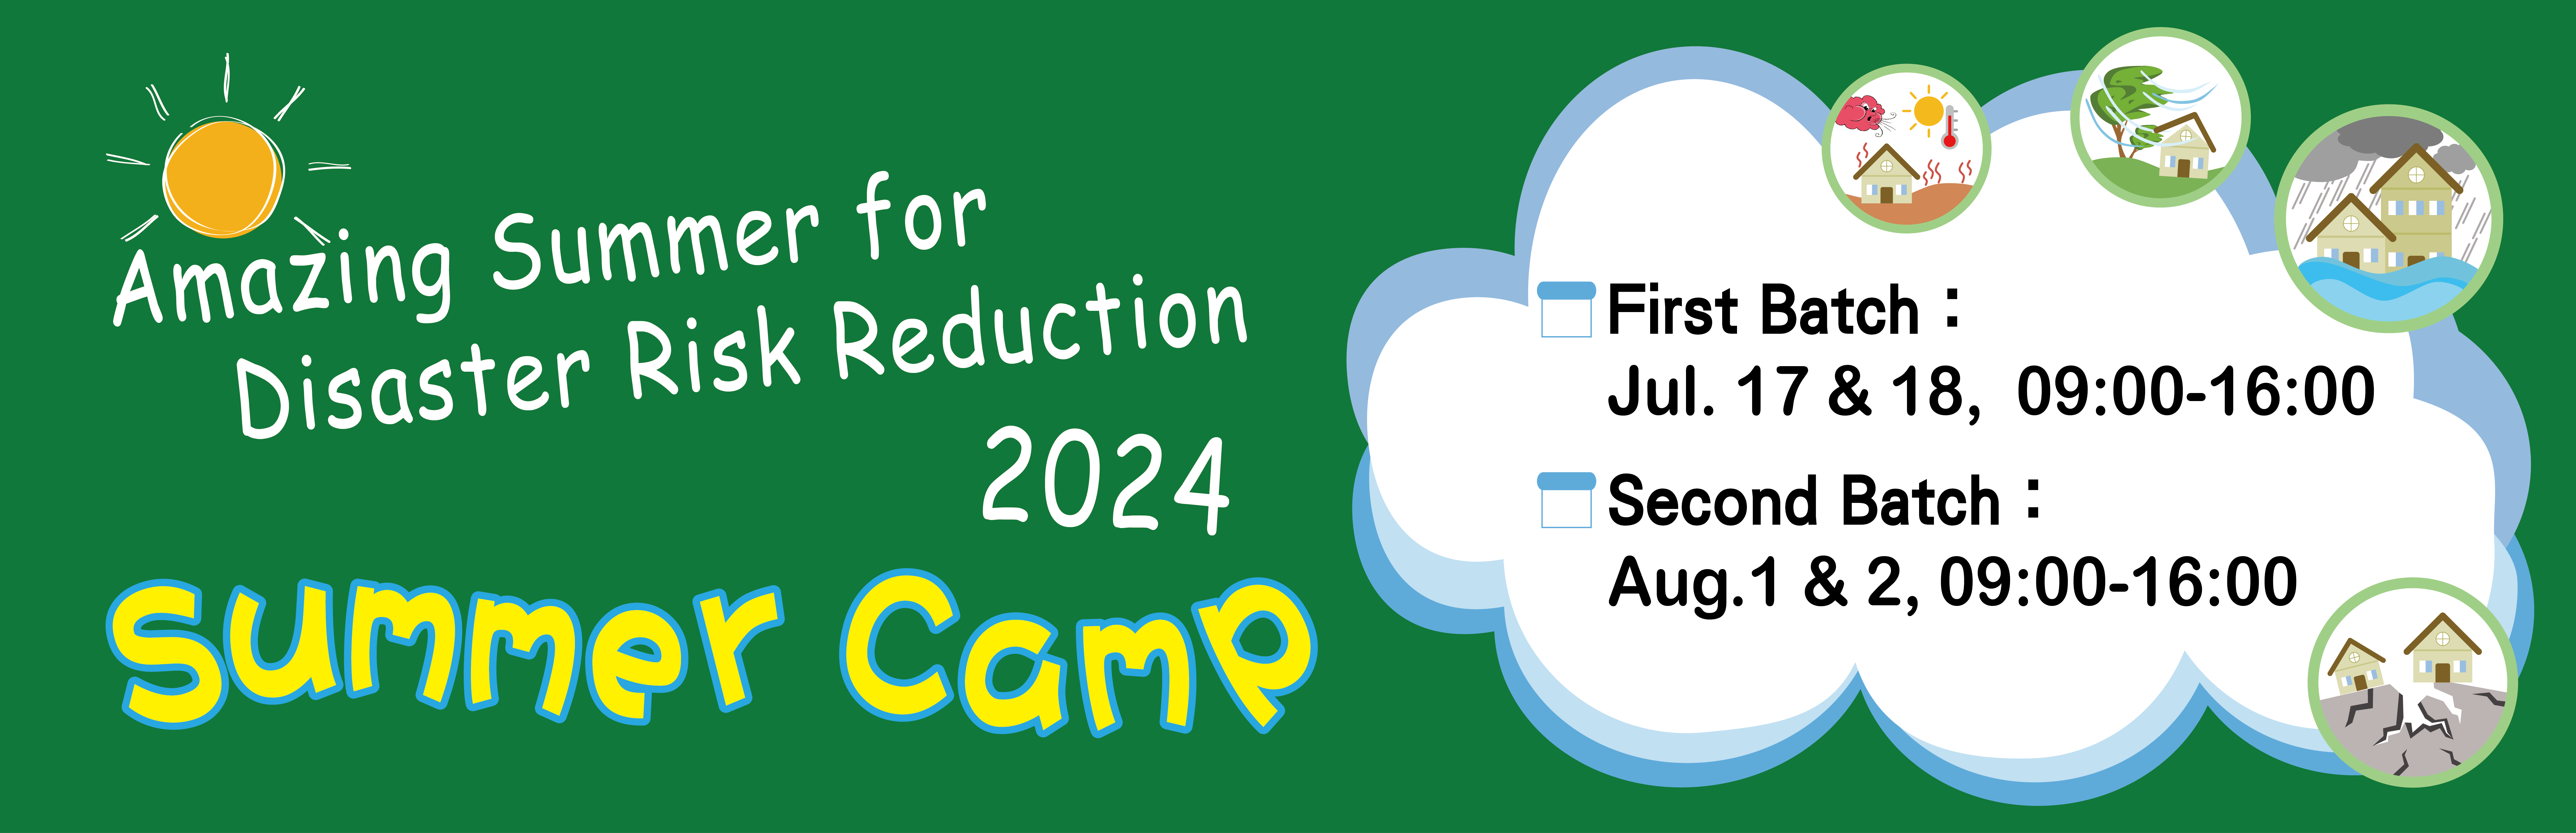 2024《Amazing Summer for Disaster Risk Reduction》Summer Camp